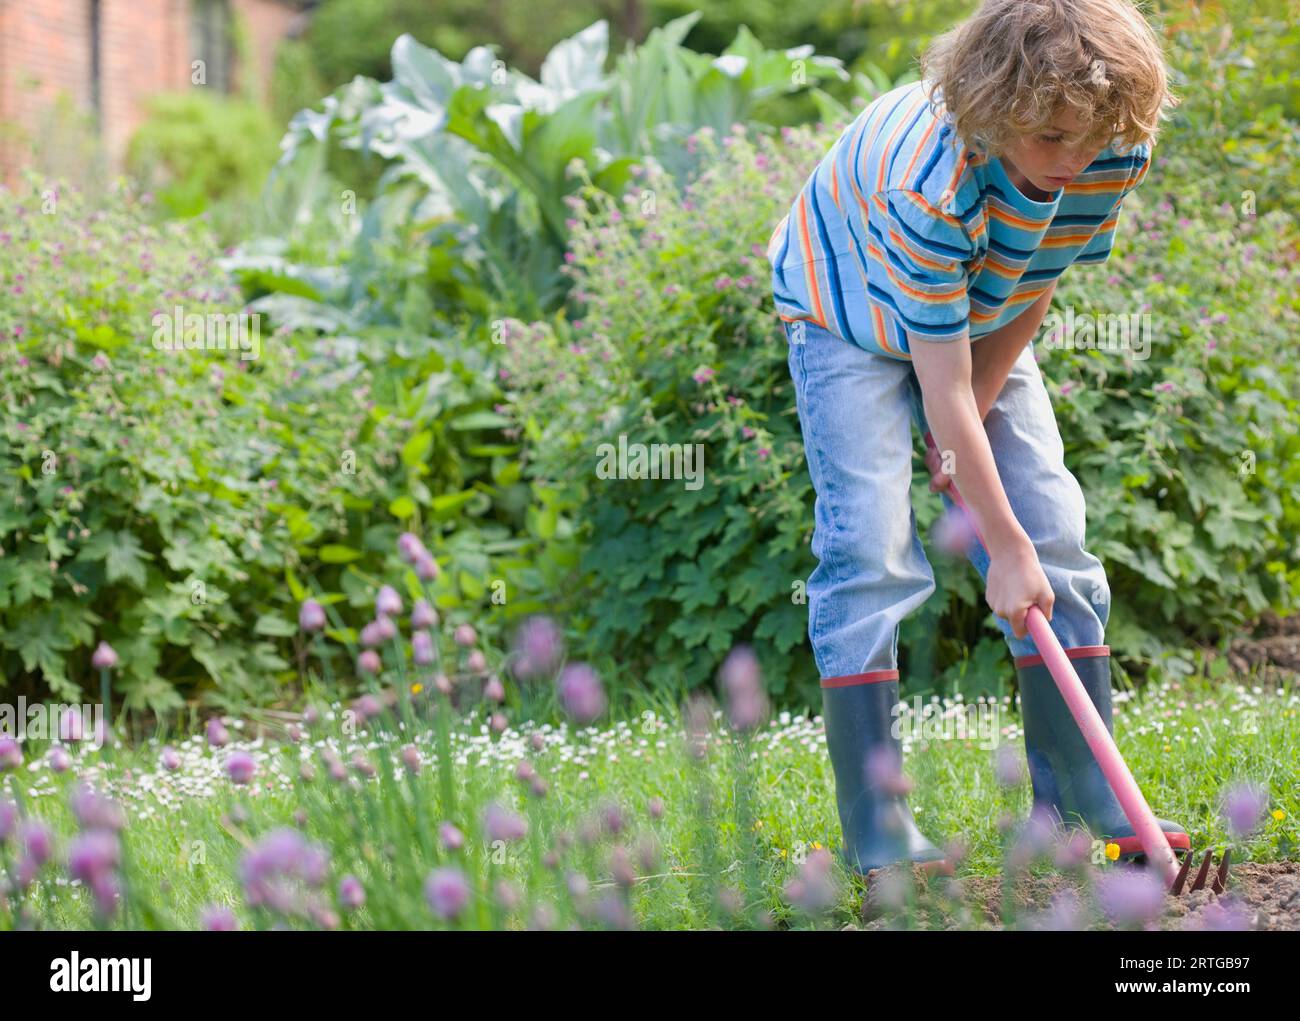 Young boy digging with hoe and fork in the garden Stock Photo